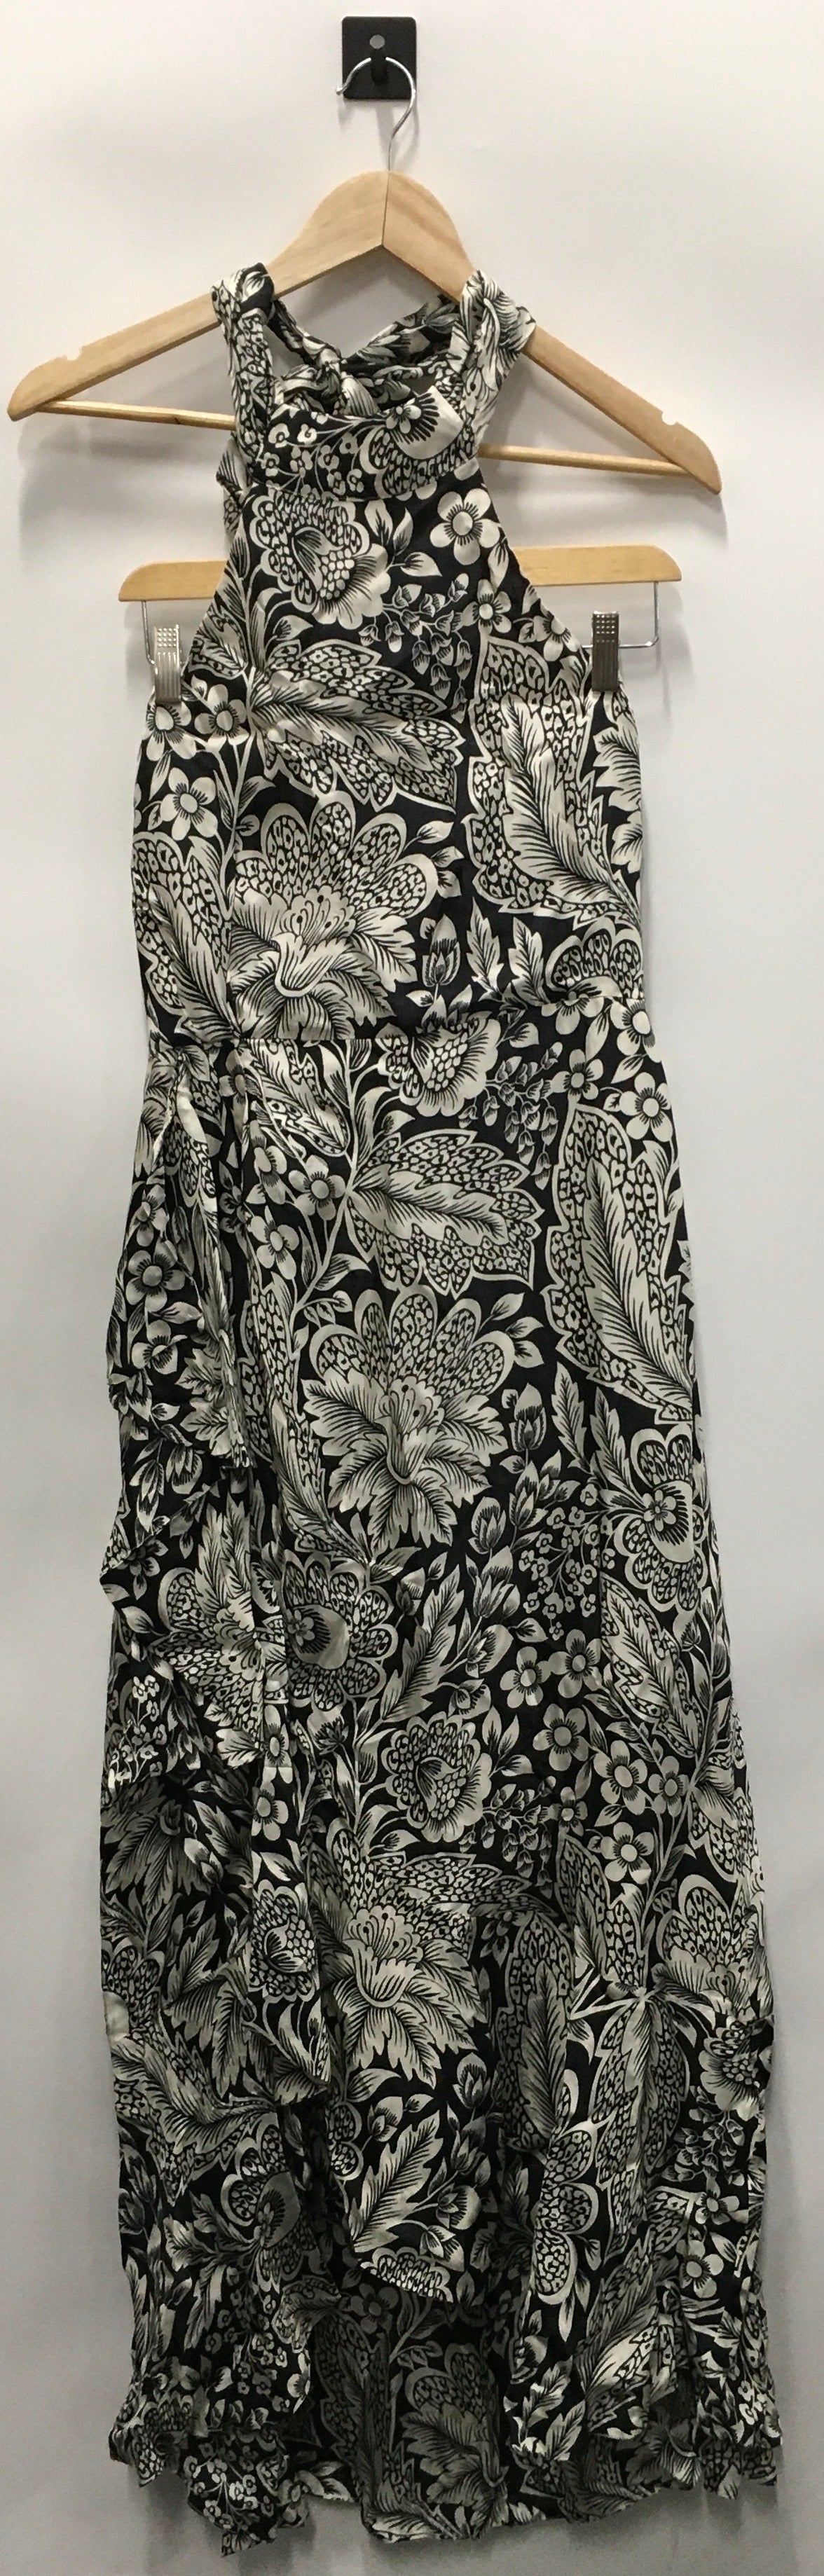 Dress Party Long By J Crew  Size: M